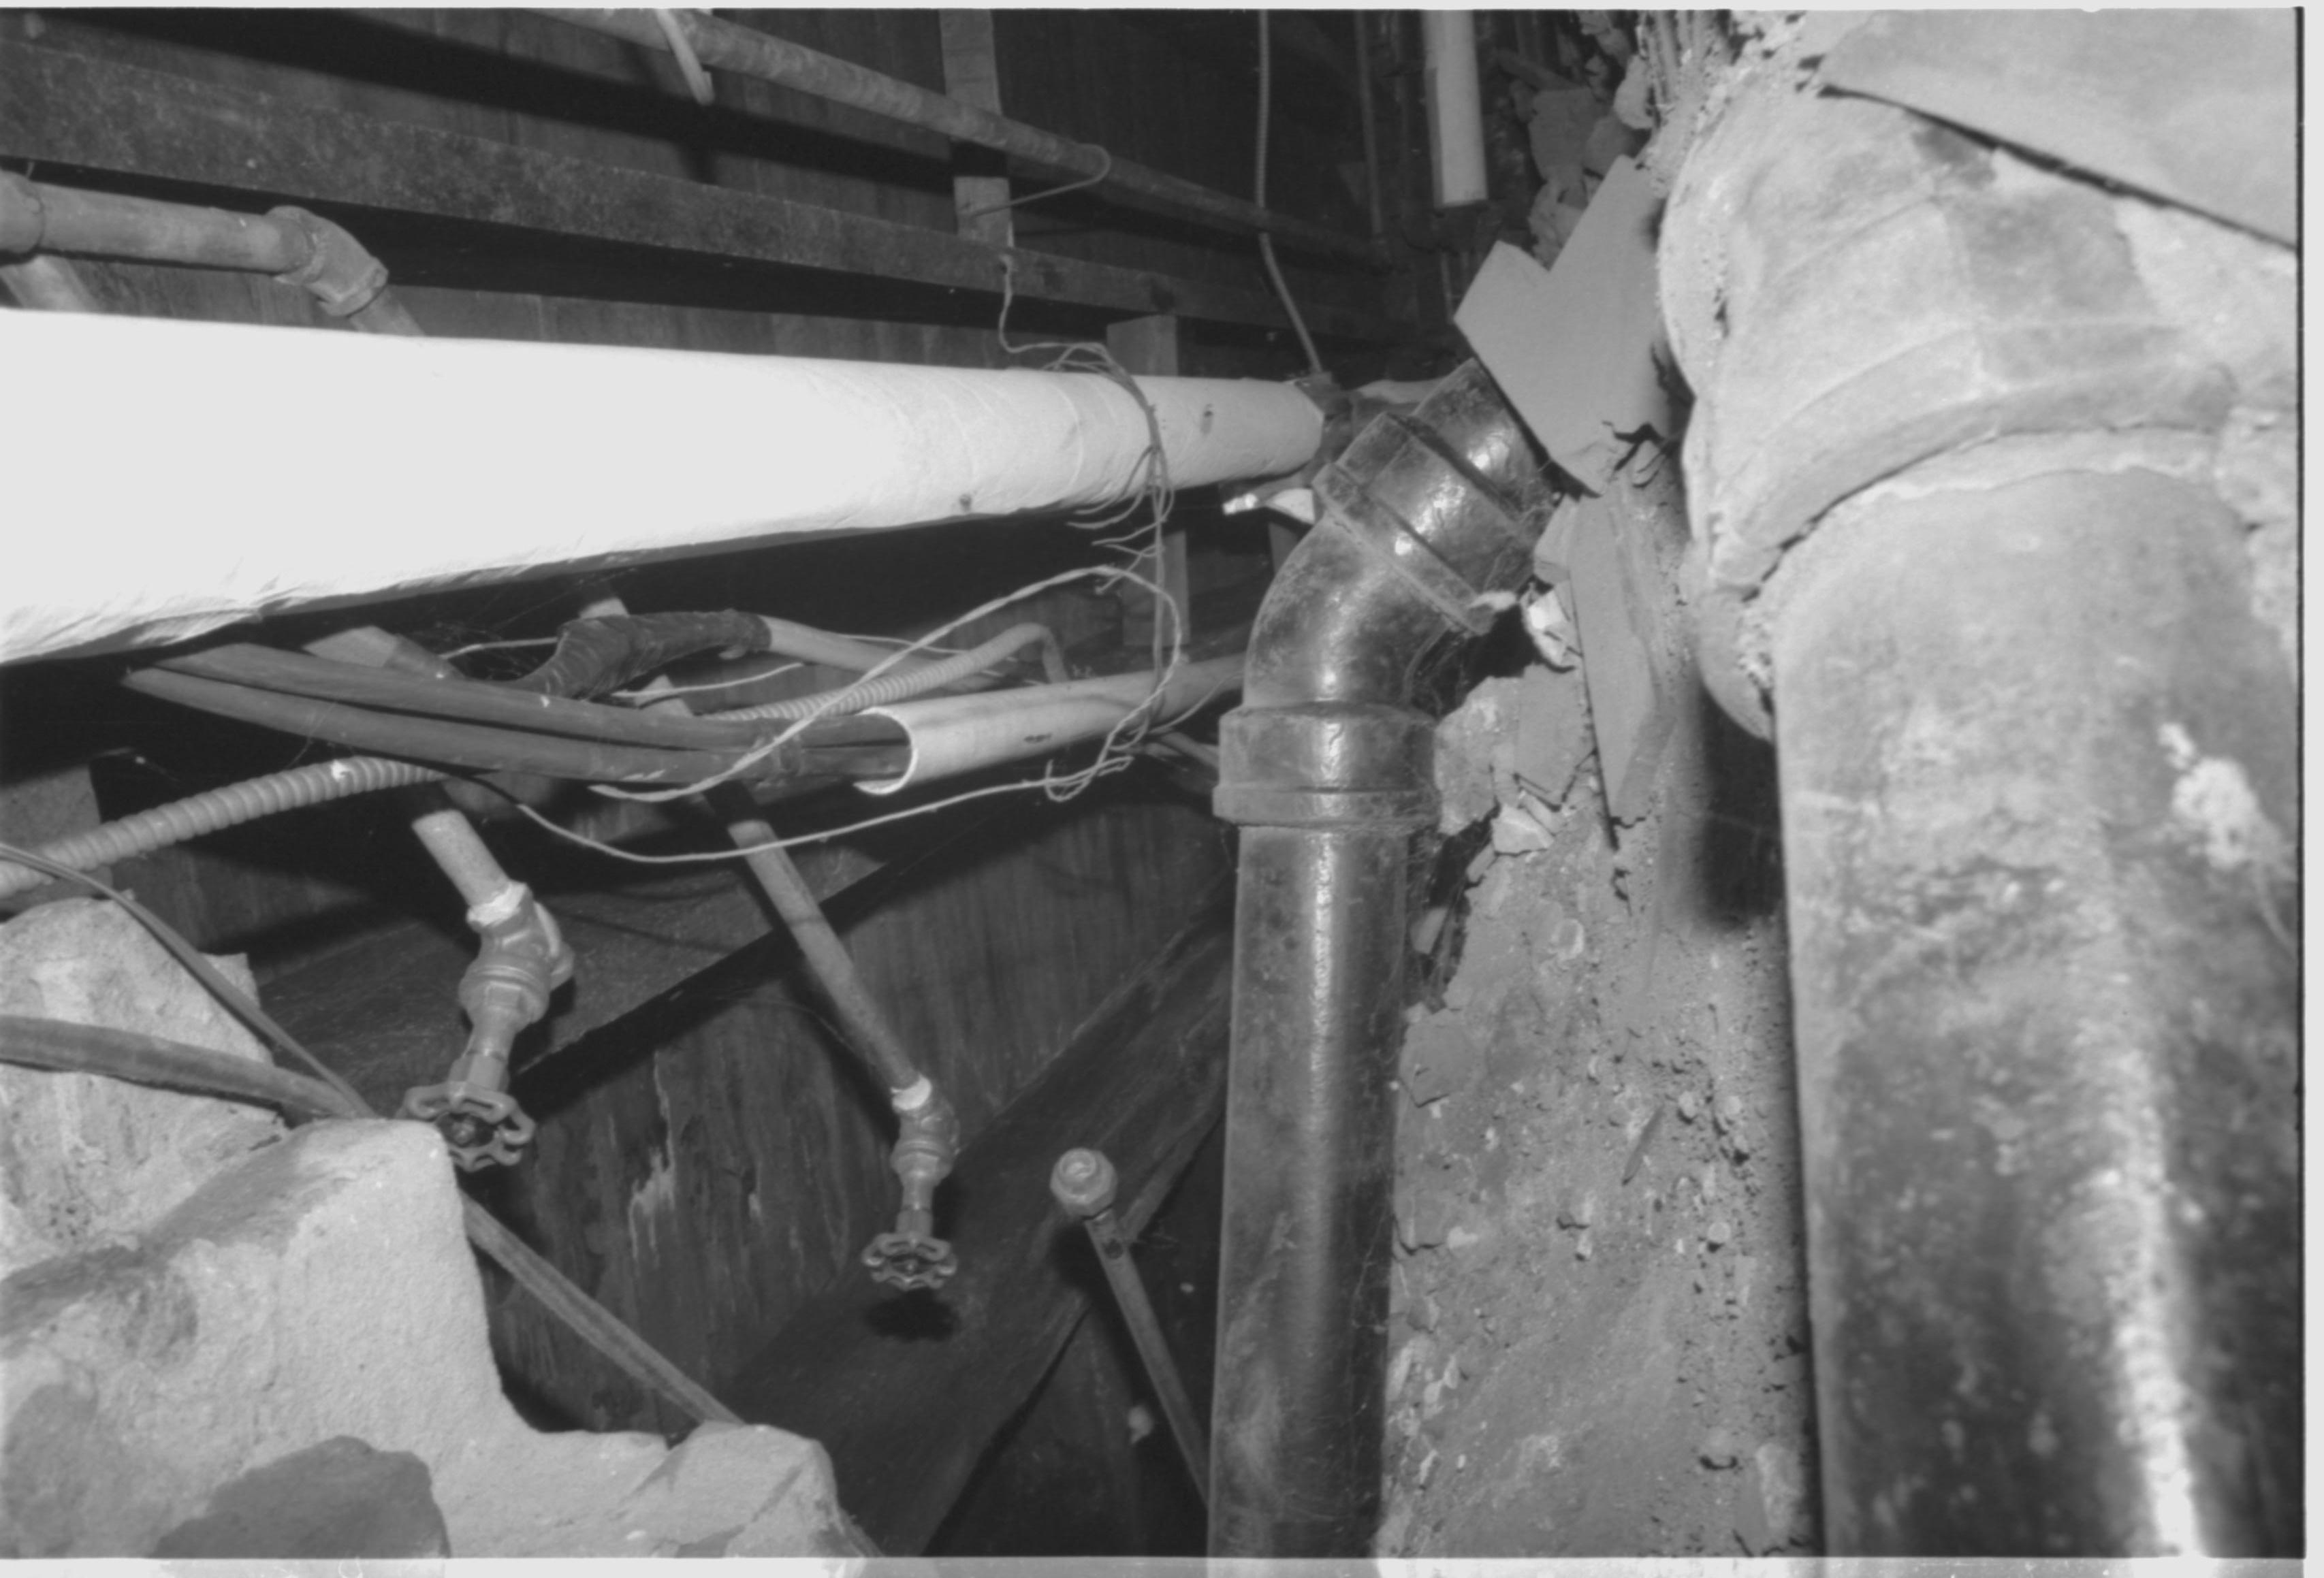 Plumb and pipes view S Morse House, LIHO-NHS, Frame #12, Neg. File #12 Morse House, Interior, Renovation